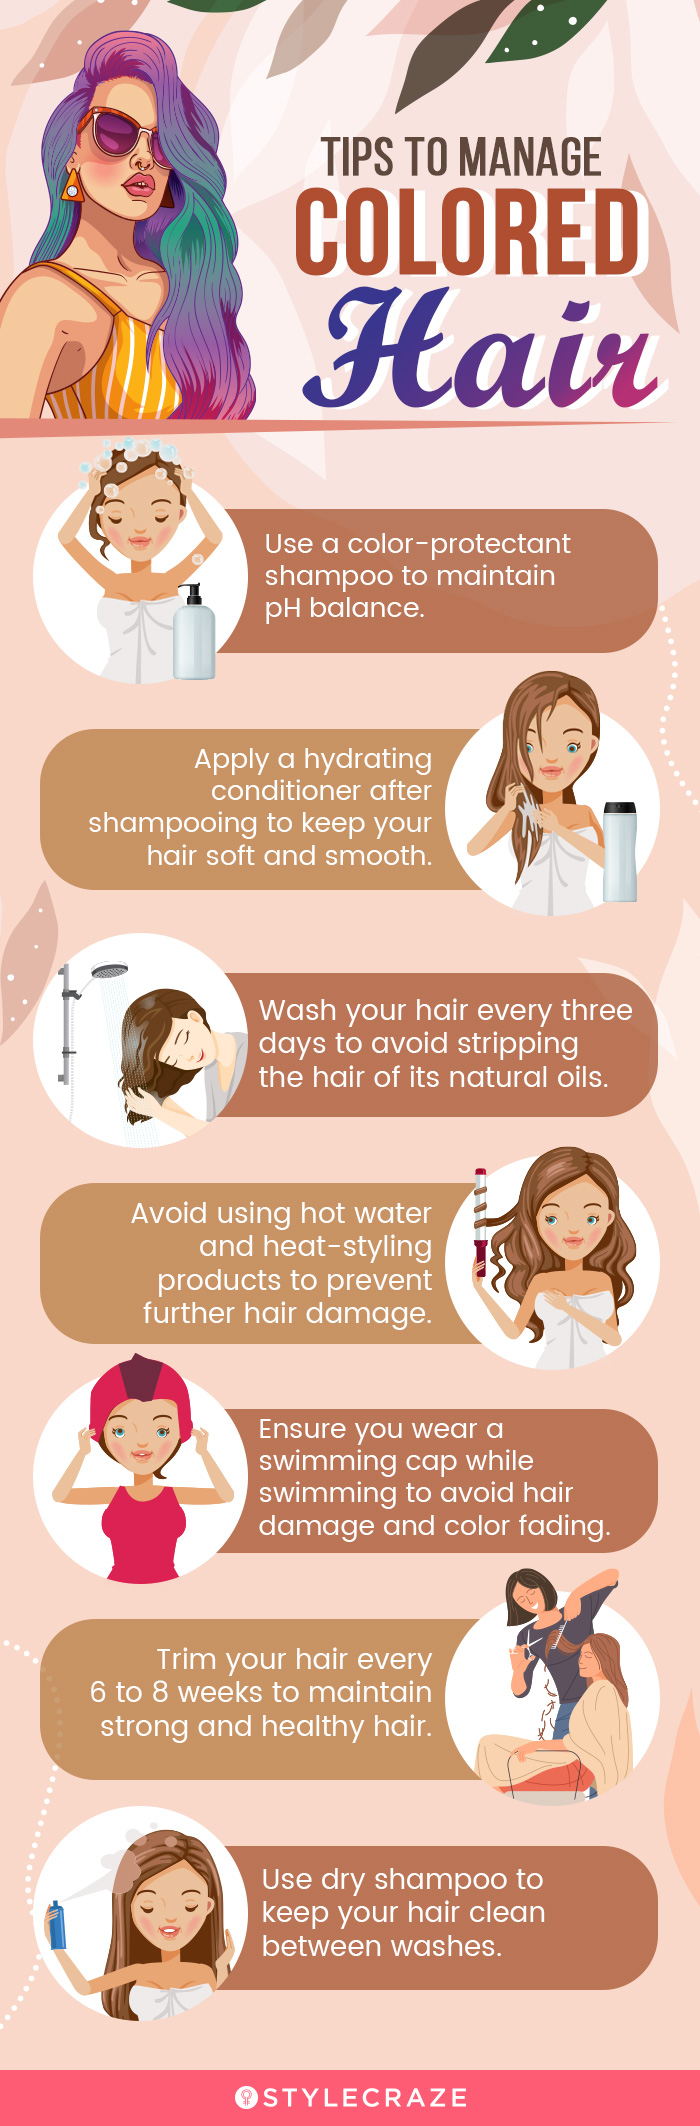 tips to manage colored hair (infographic)